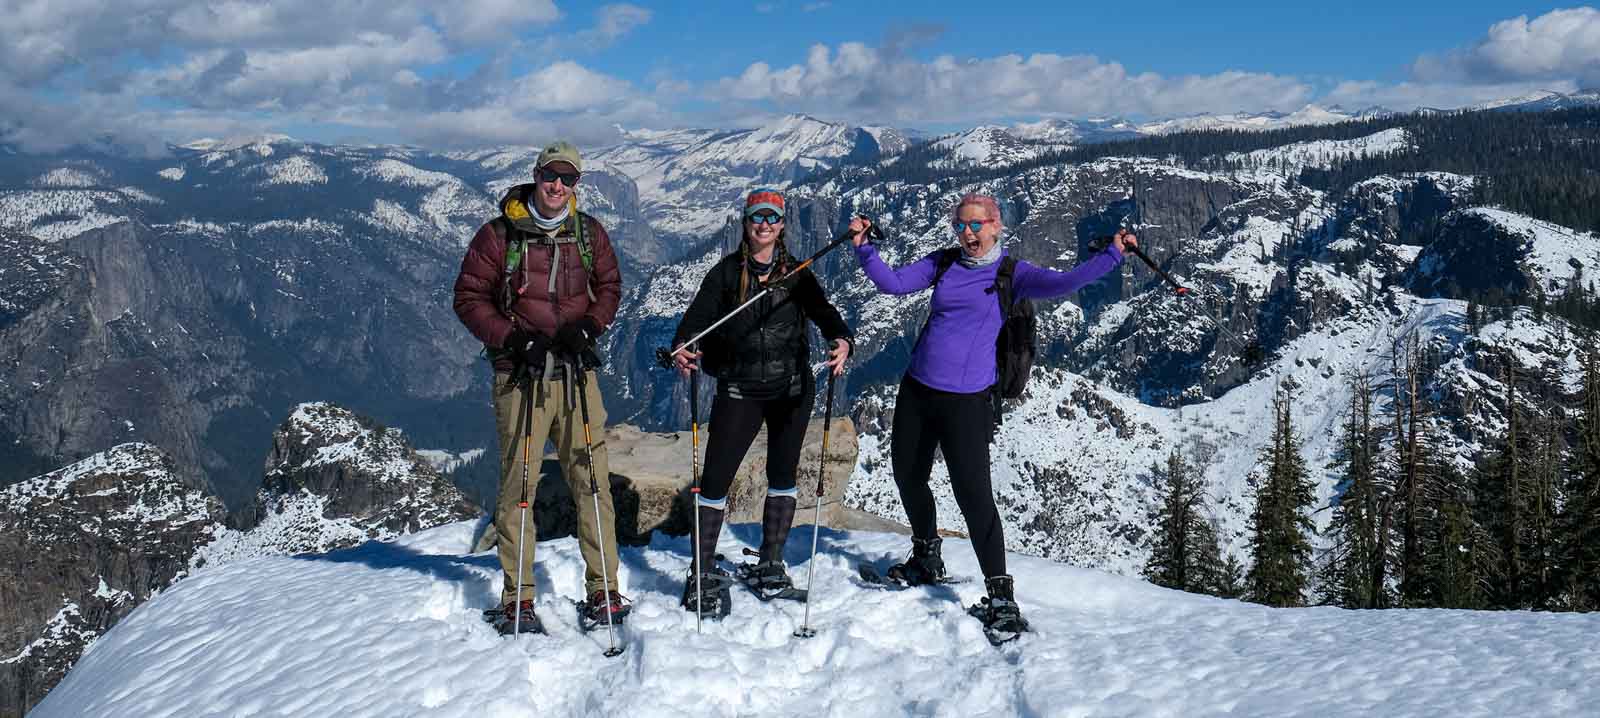 EXPLORE OUR WINTER YOSEMITE GUIDED BACKPACKING TRIPS AND DAY HIKES